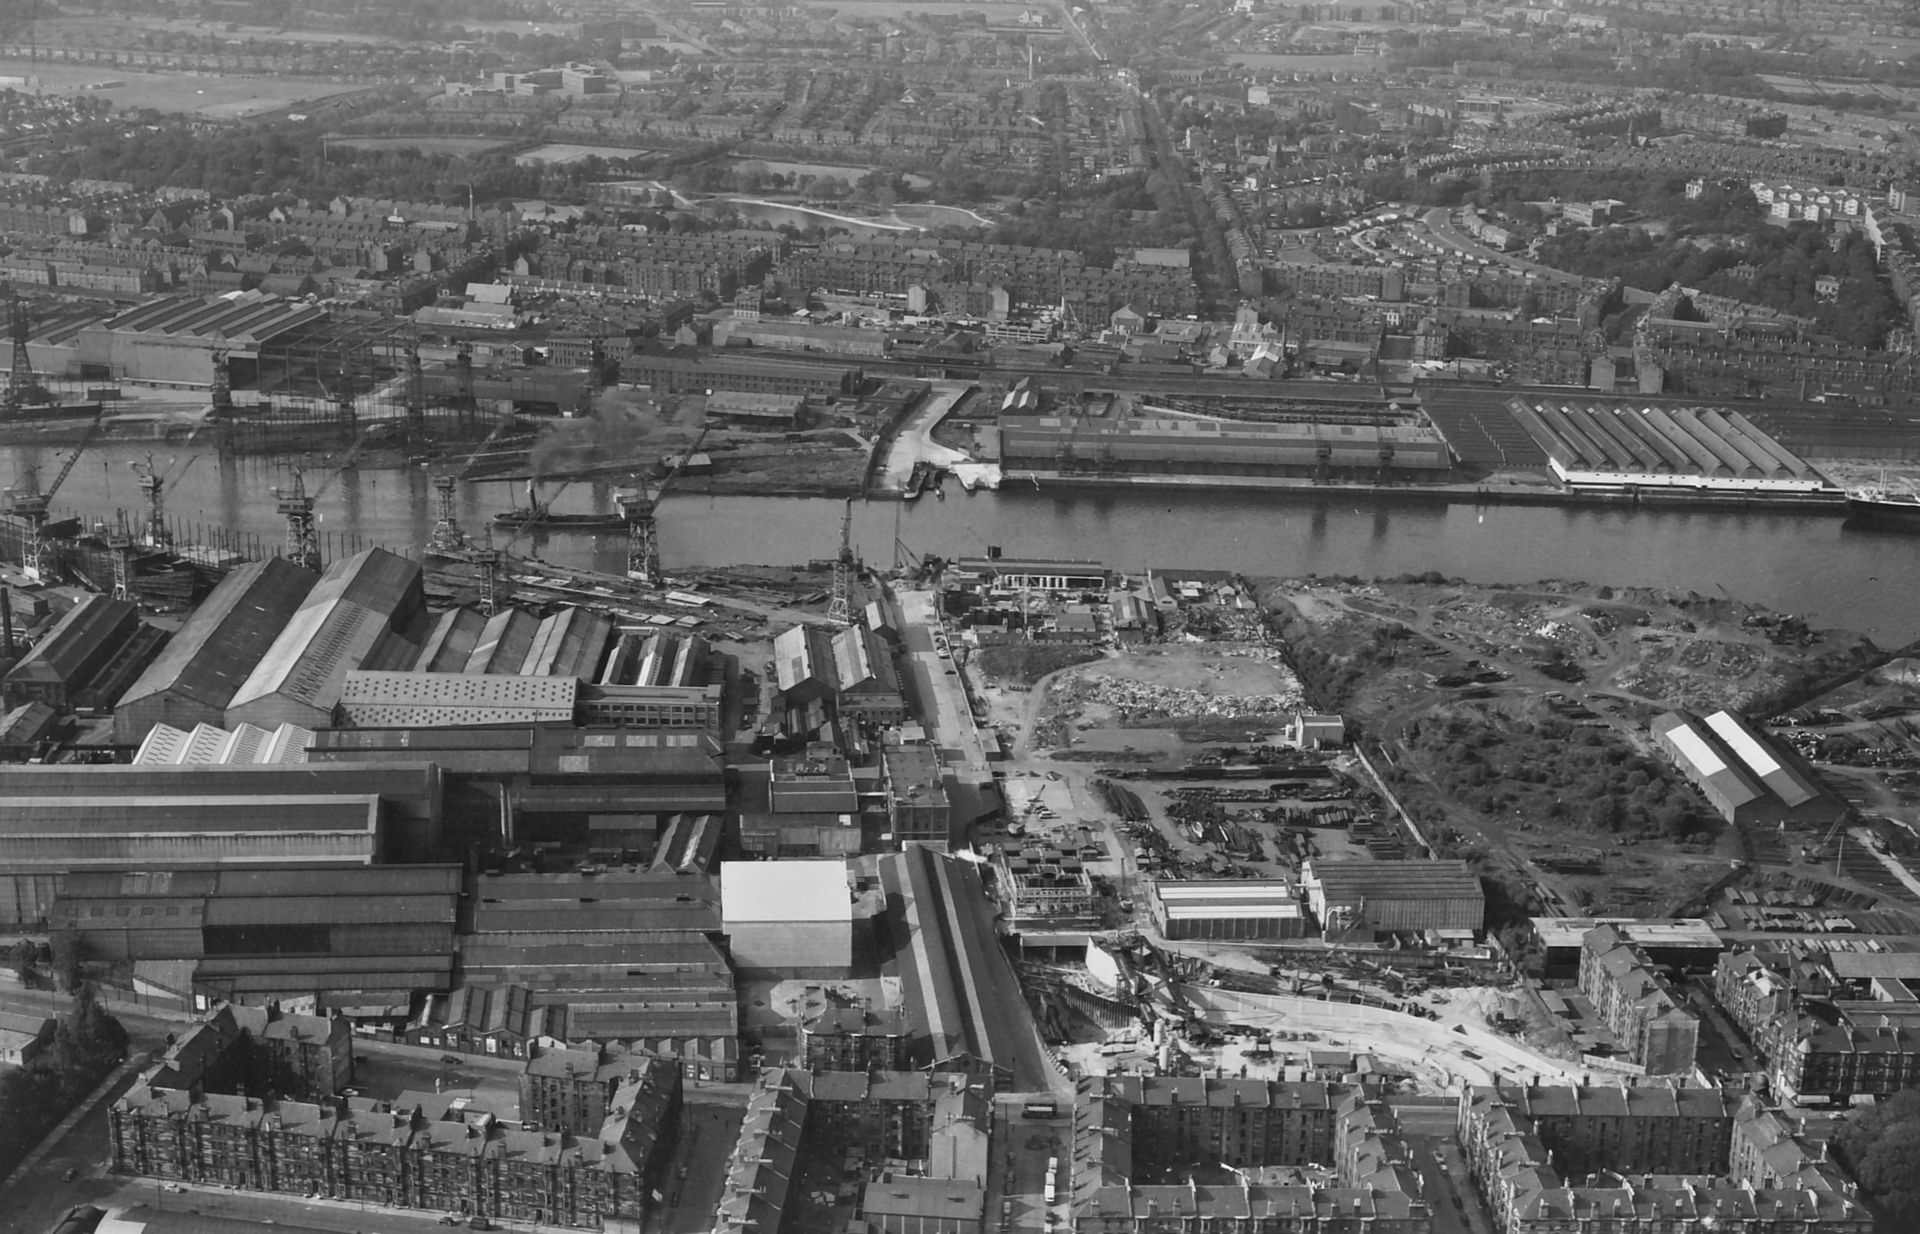 Clyde Tunnel - Aerial View from the South (June 1962)